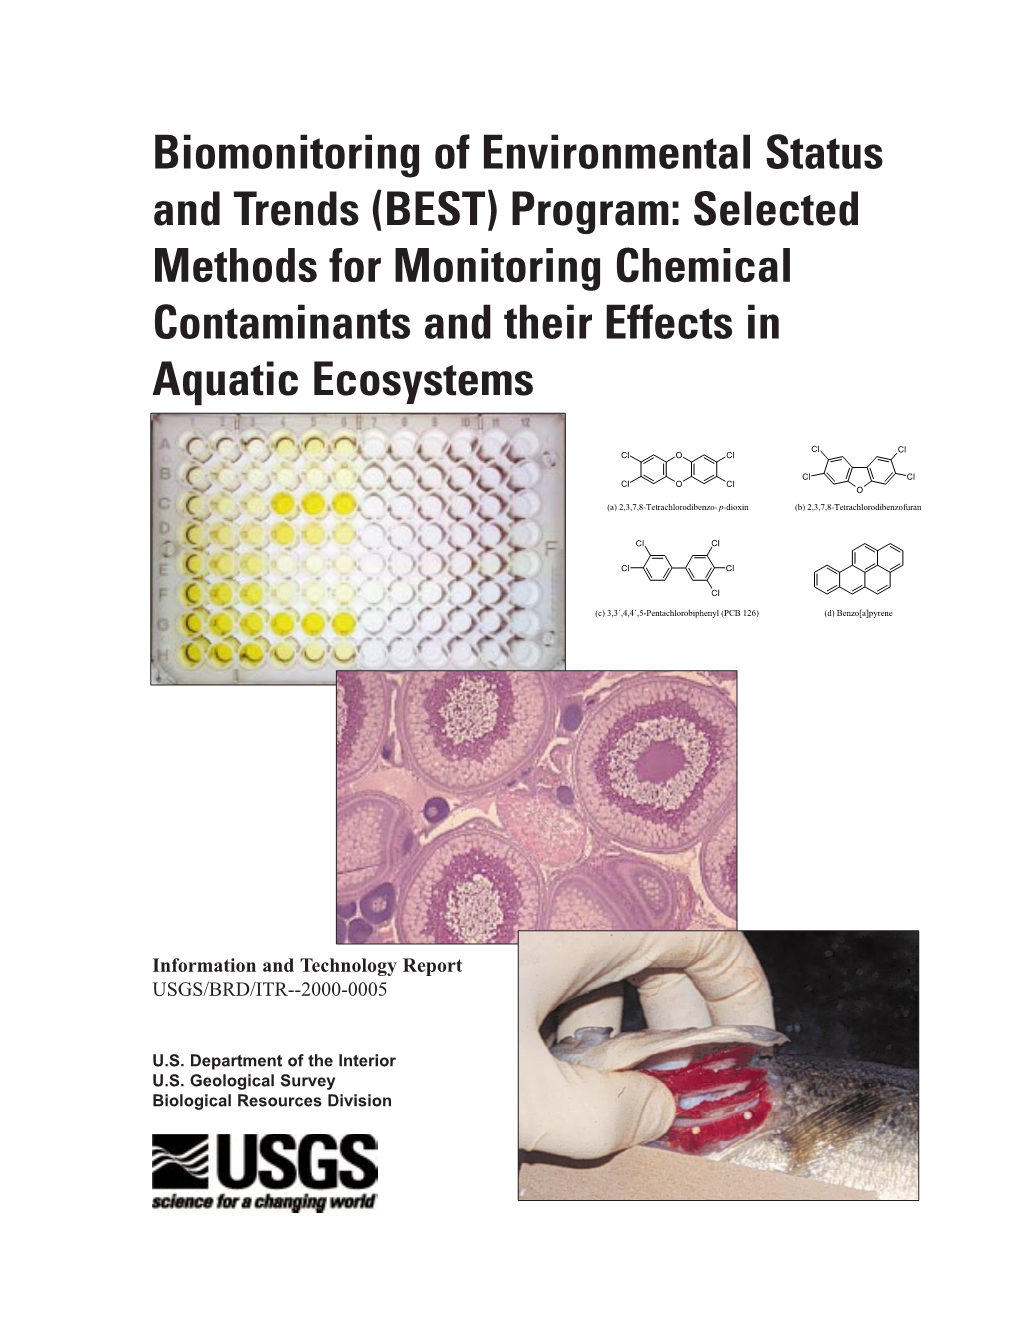 Biomonitoring of Environmental Status and Trends (BEST) Program: Selected Methods for Monitoring Chemical Contaminants and Their Effects in Aquatic Ecosystems